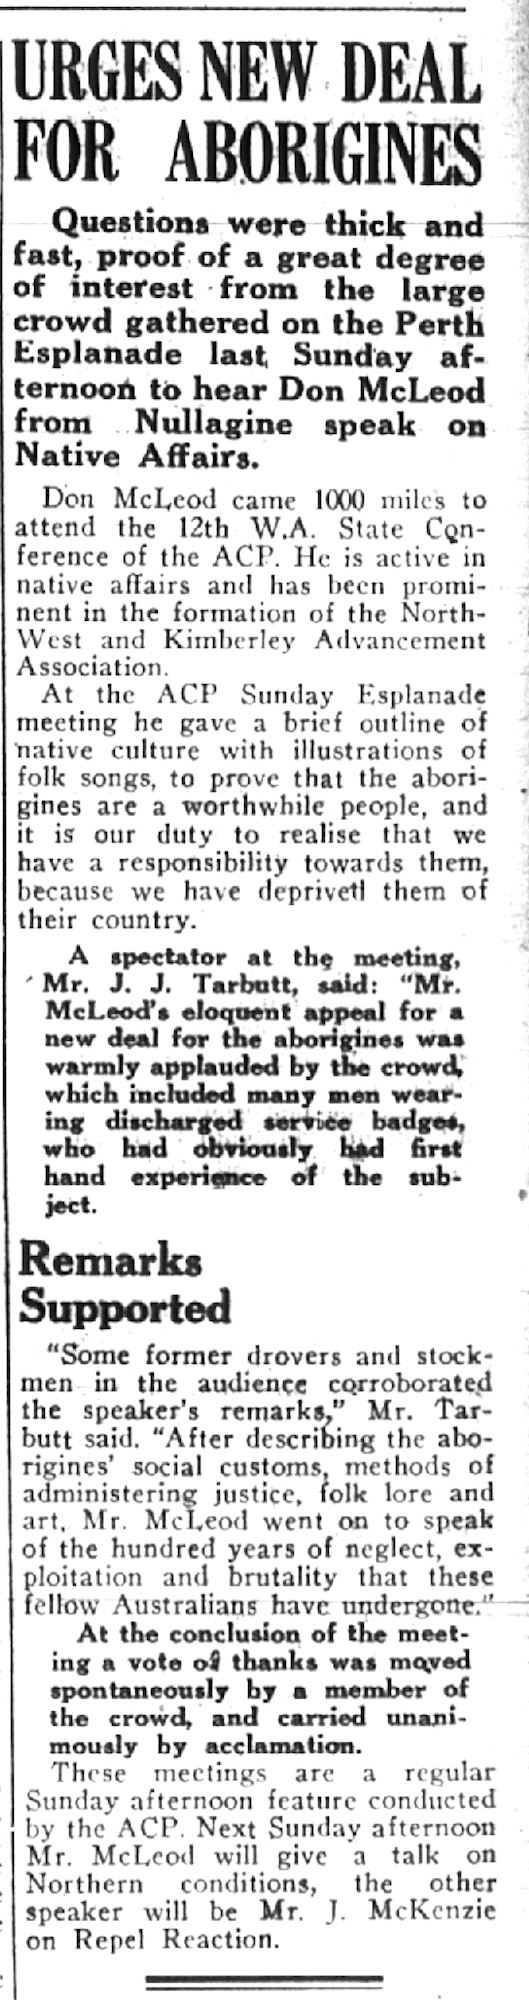 Newspaper article, "Urges New Deal for Aborigines"